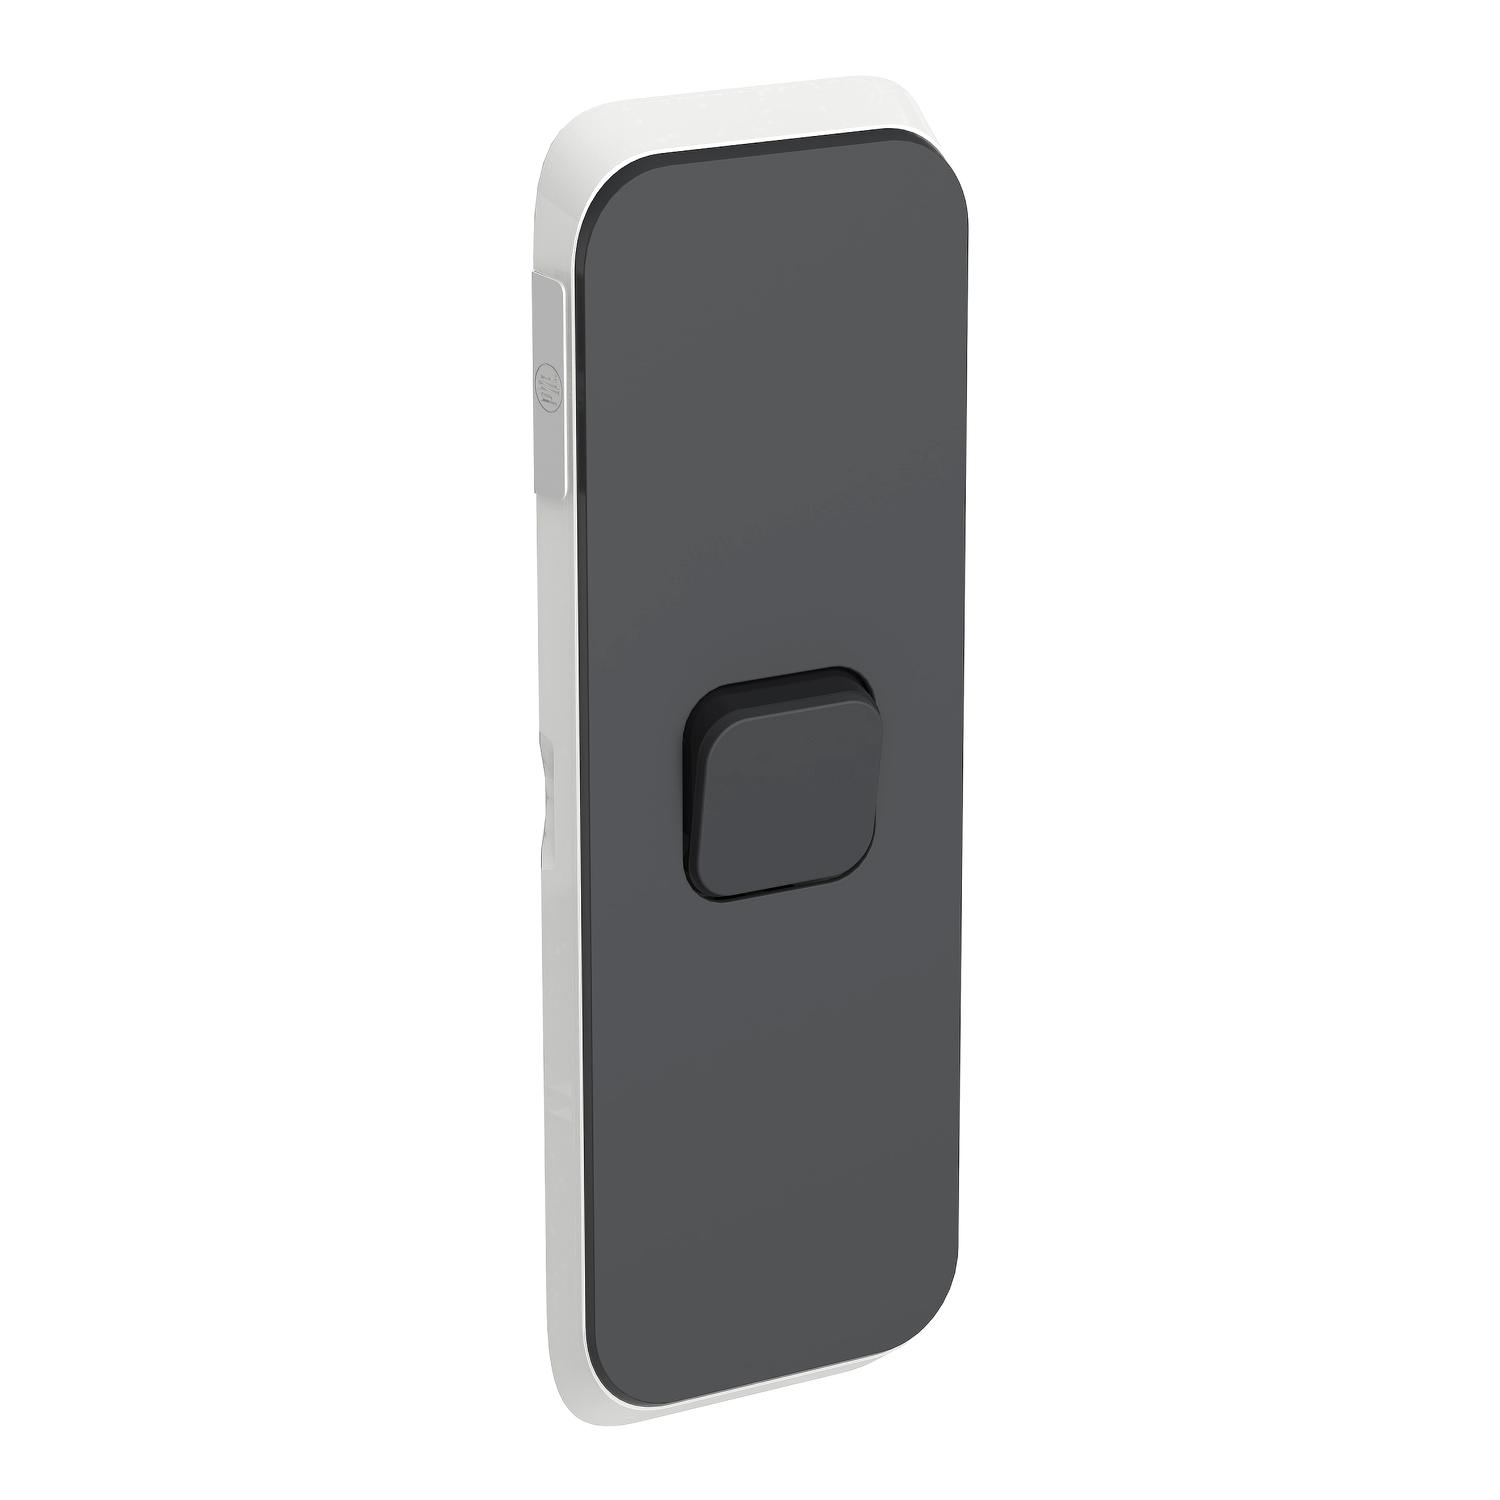 PDL Iconic - Cover Plate Switch Architrave 1-Gang - Anthracite